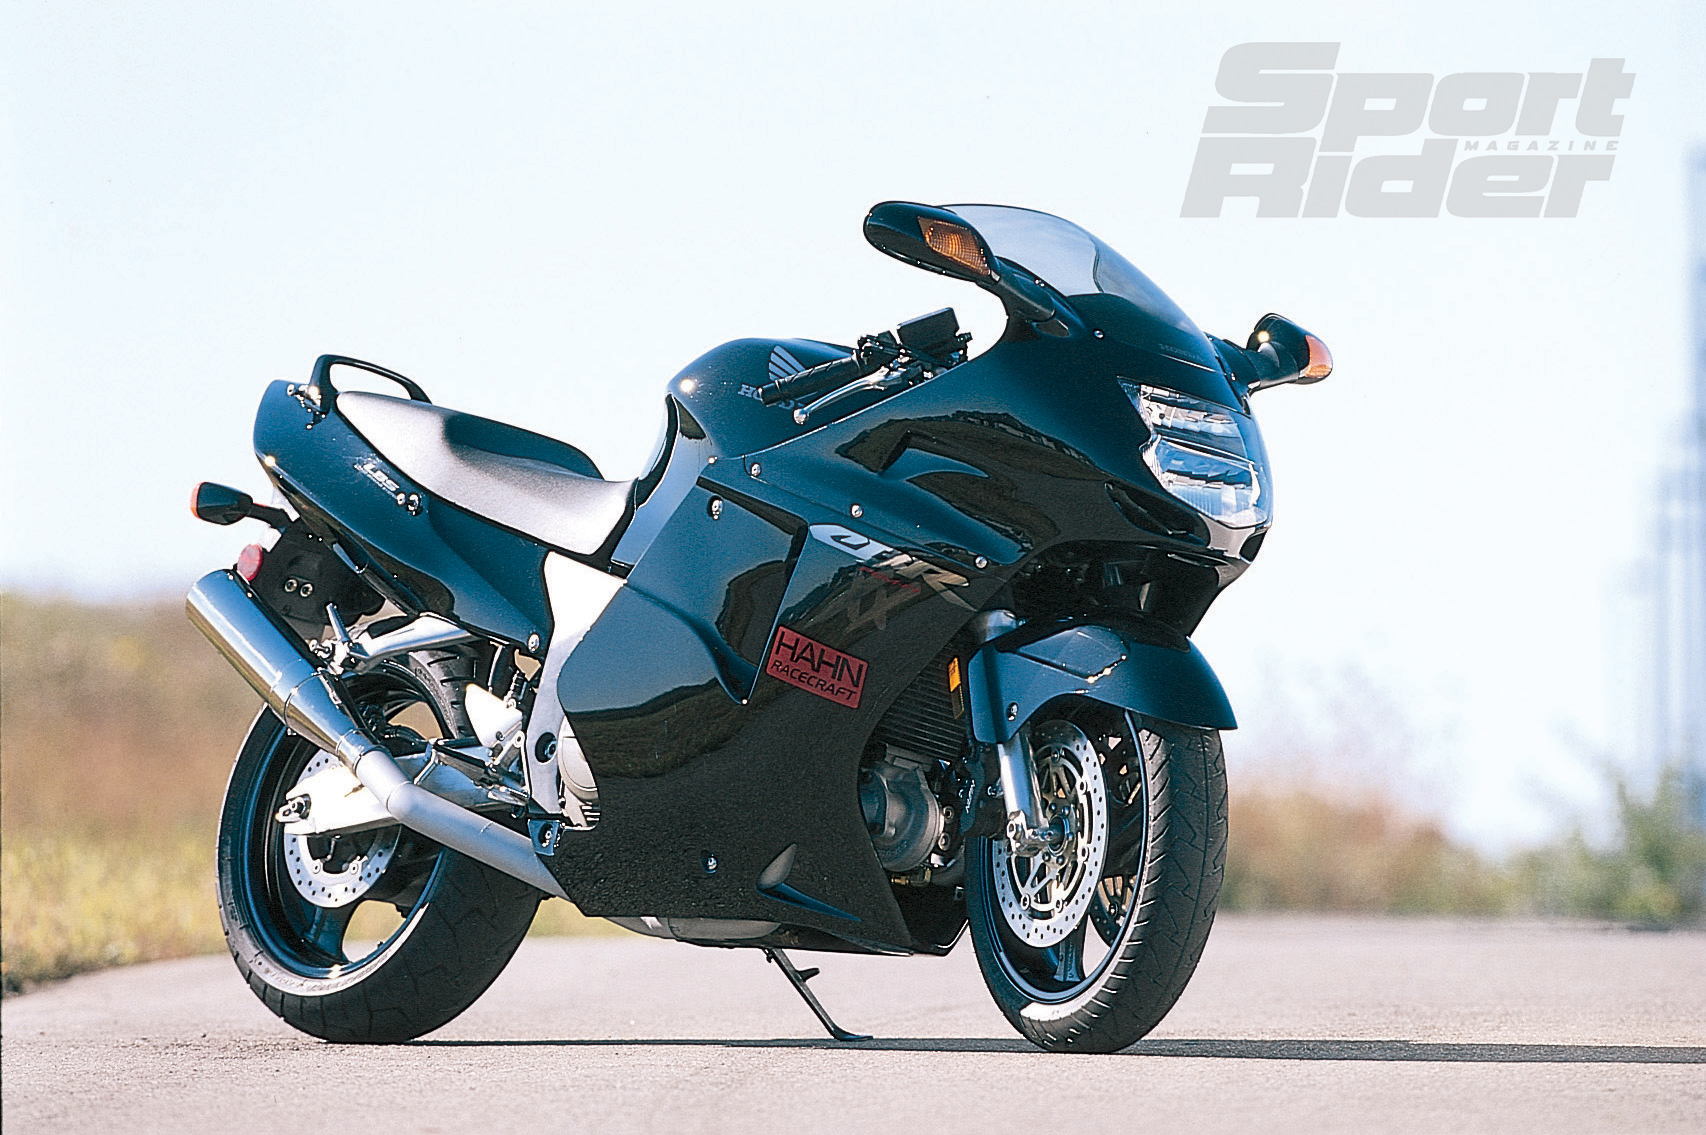 1997-2003 Honda CBR1100XX - Great Sportbikes of the Past | Cycle World